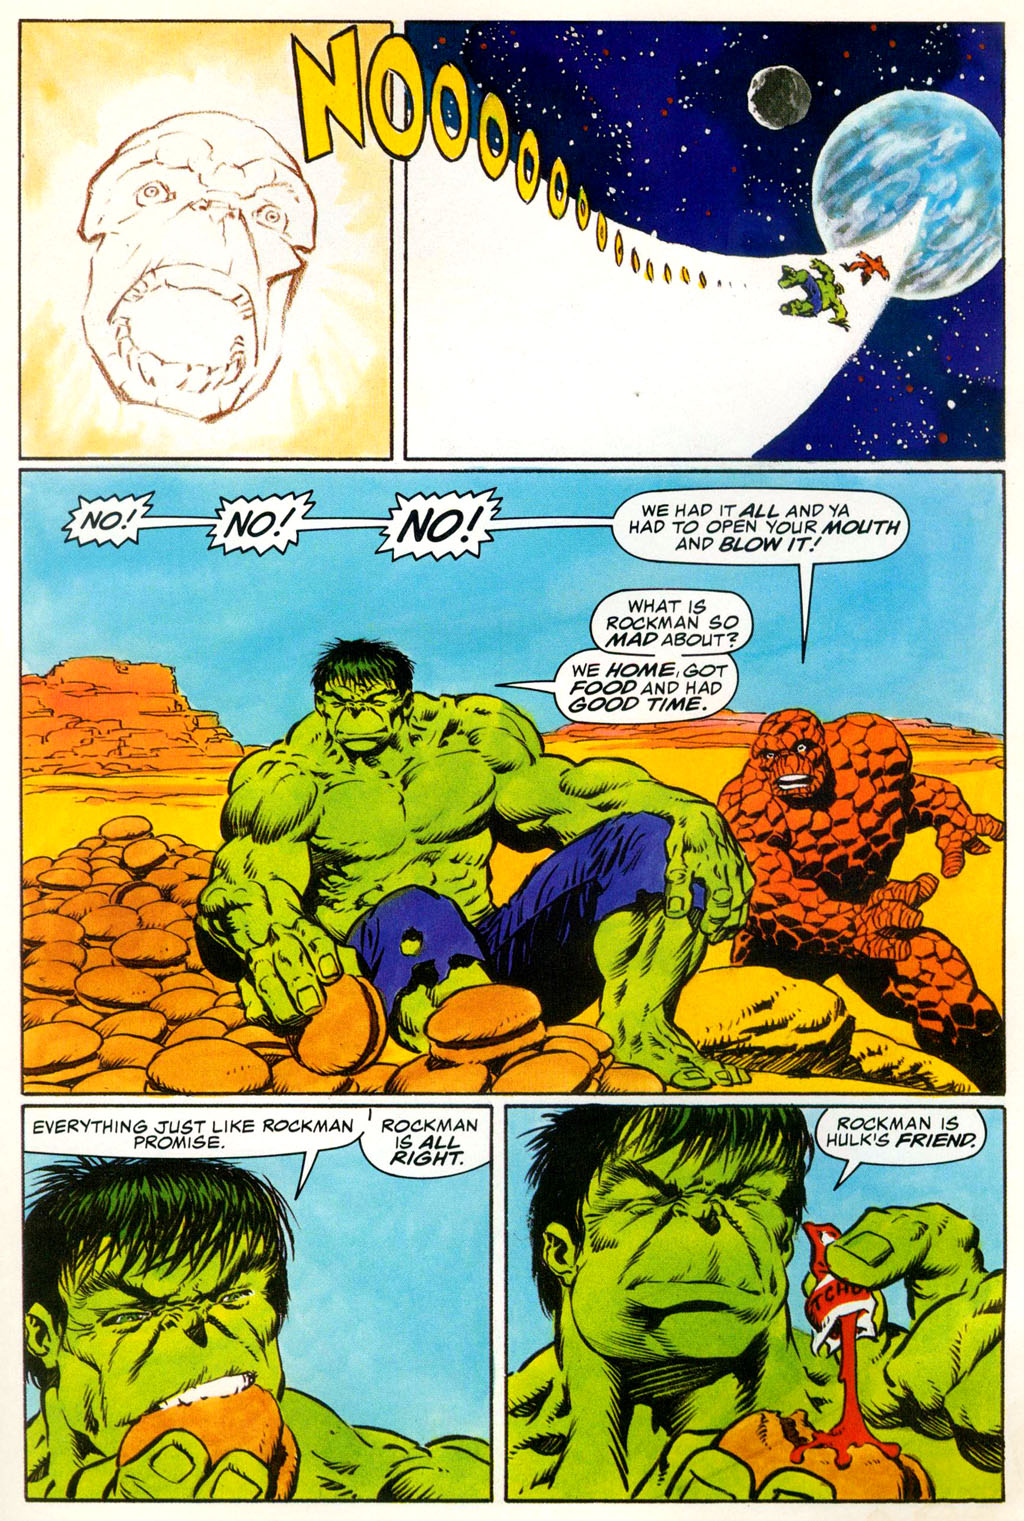 Read online Marvel Graphic Novel comic -  Issue #29 - Hulk & Thing - The Big Change - 68